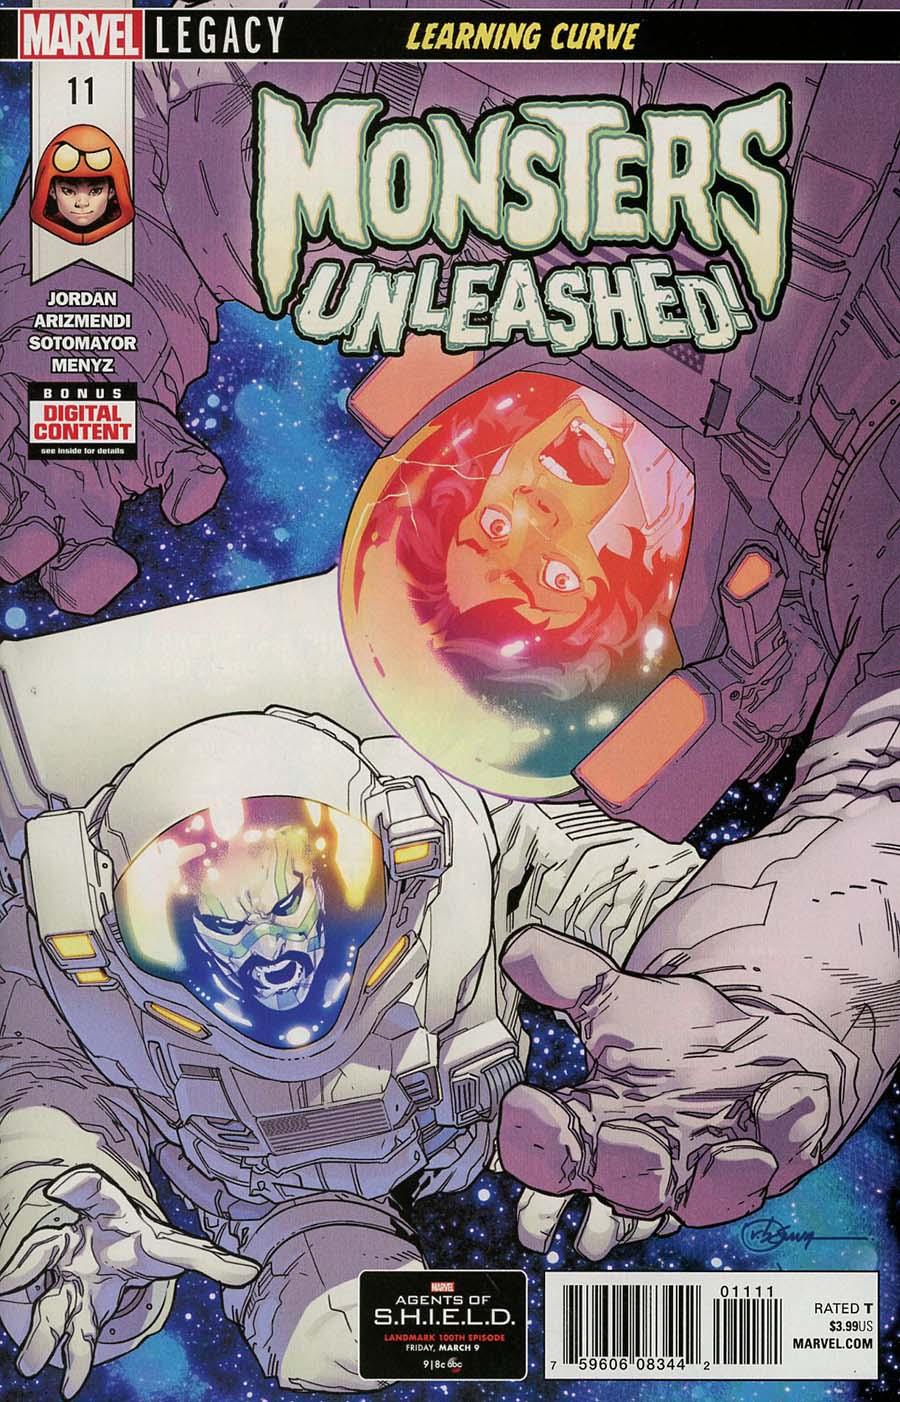 Monsters Unleashed Vol. 2 #11